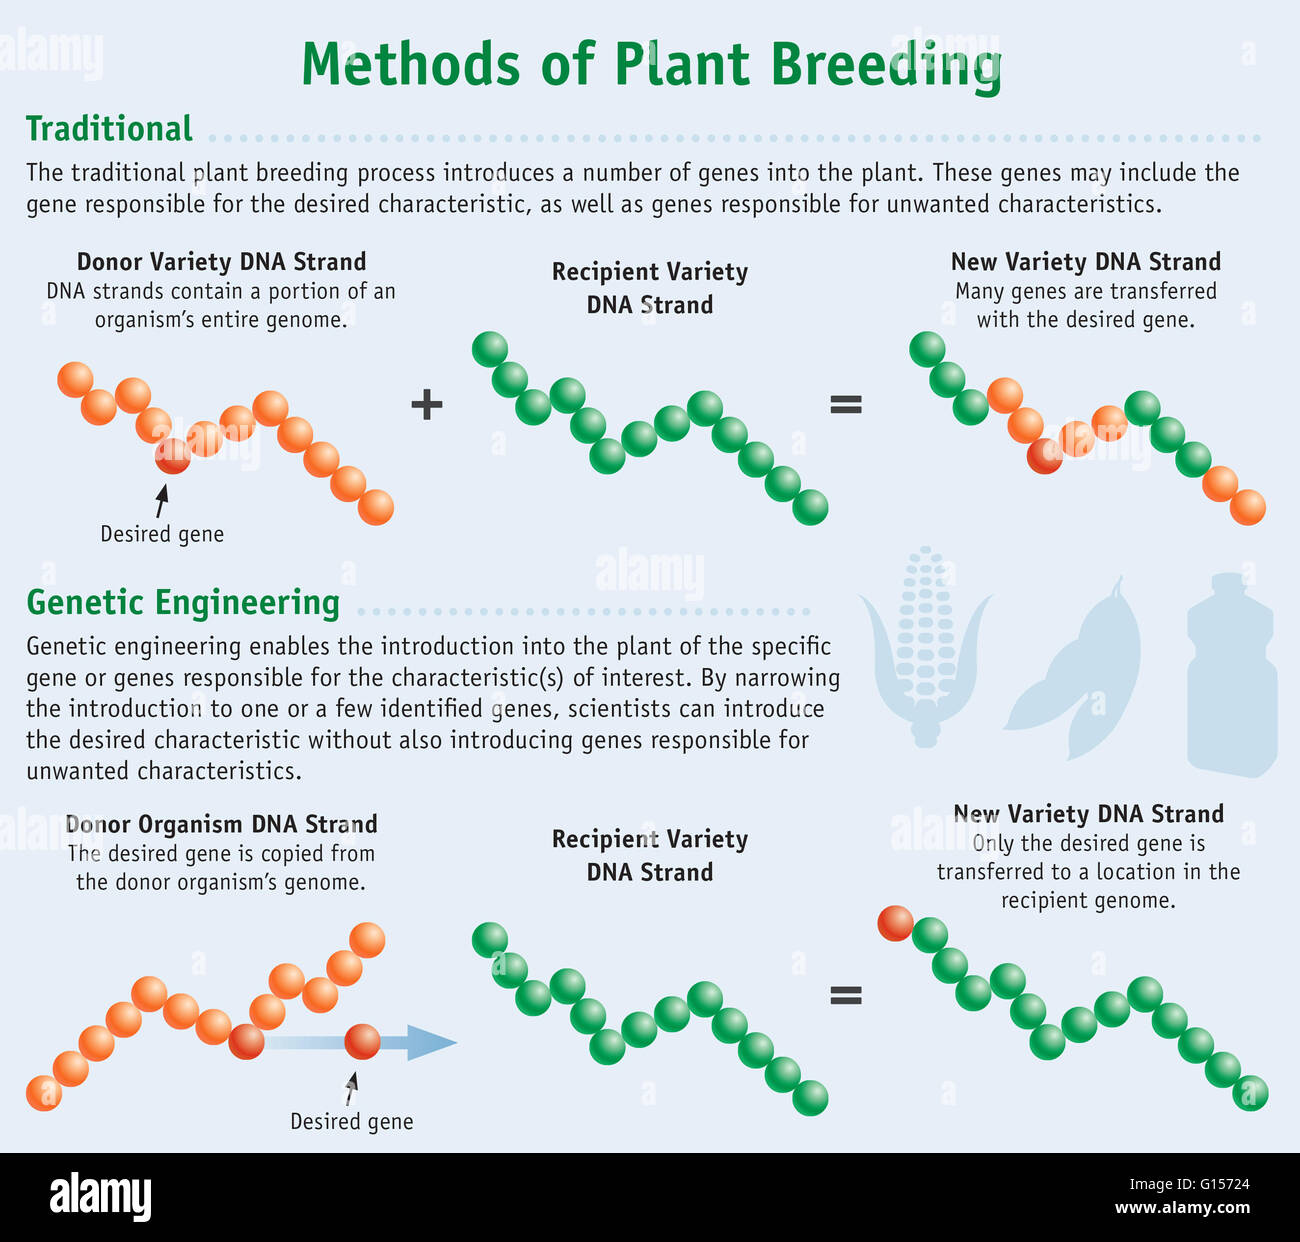 The traditional plant breeding process introduces a number genes into the plant. These genes include the gene responsible for the desired characteristic, as well as genes responsible for unwanted